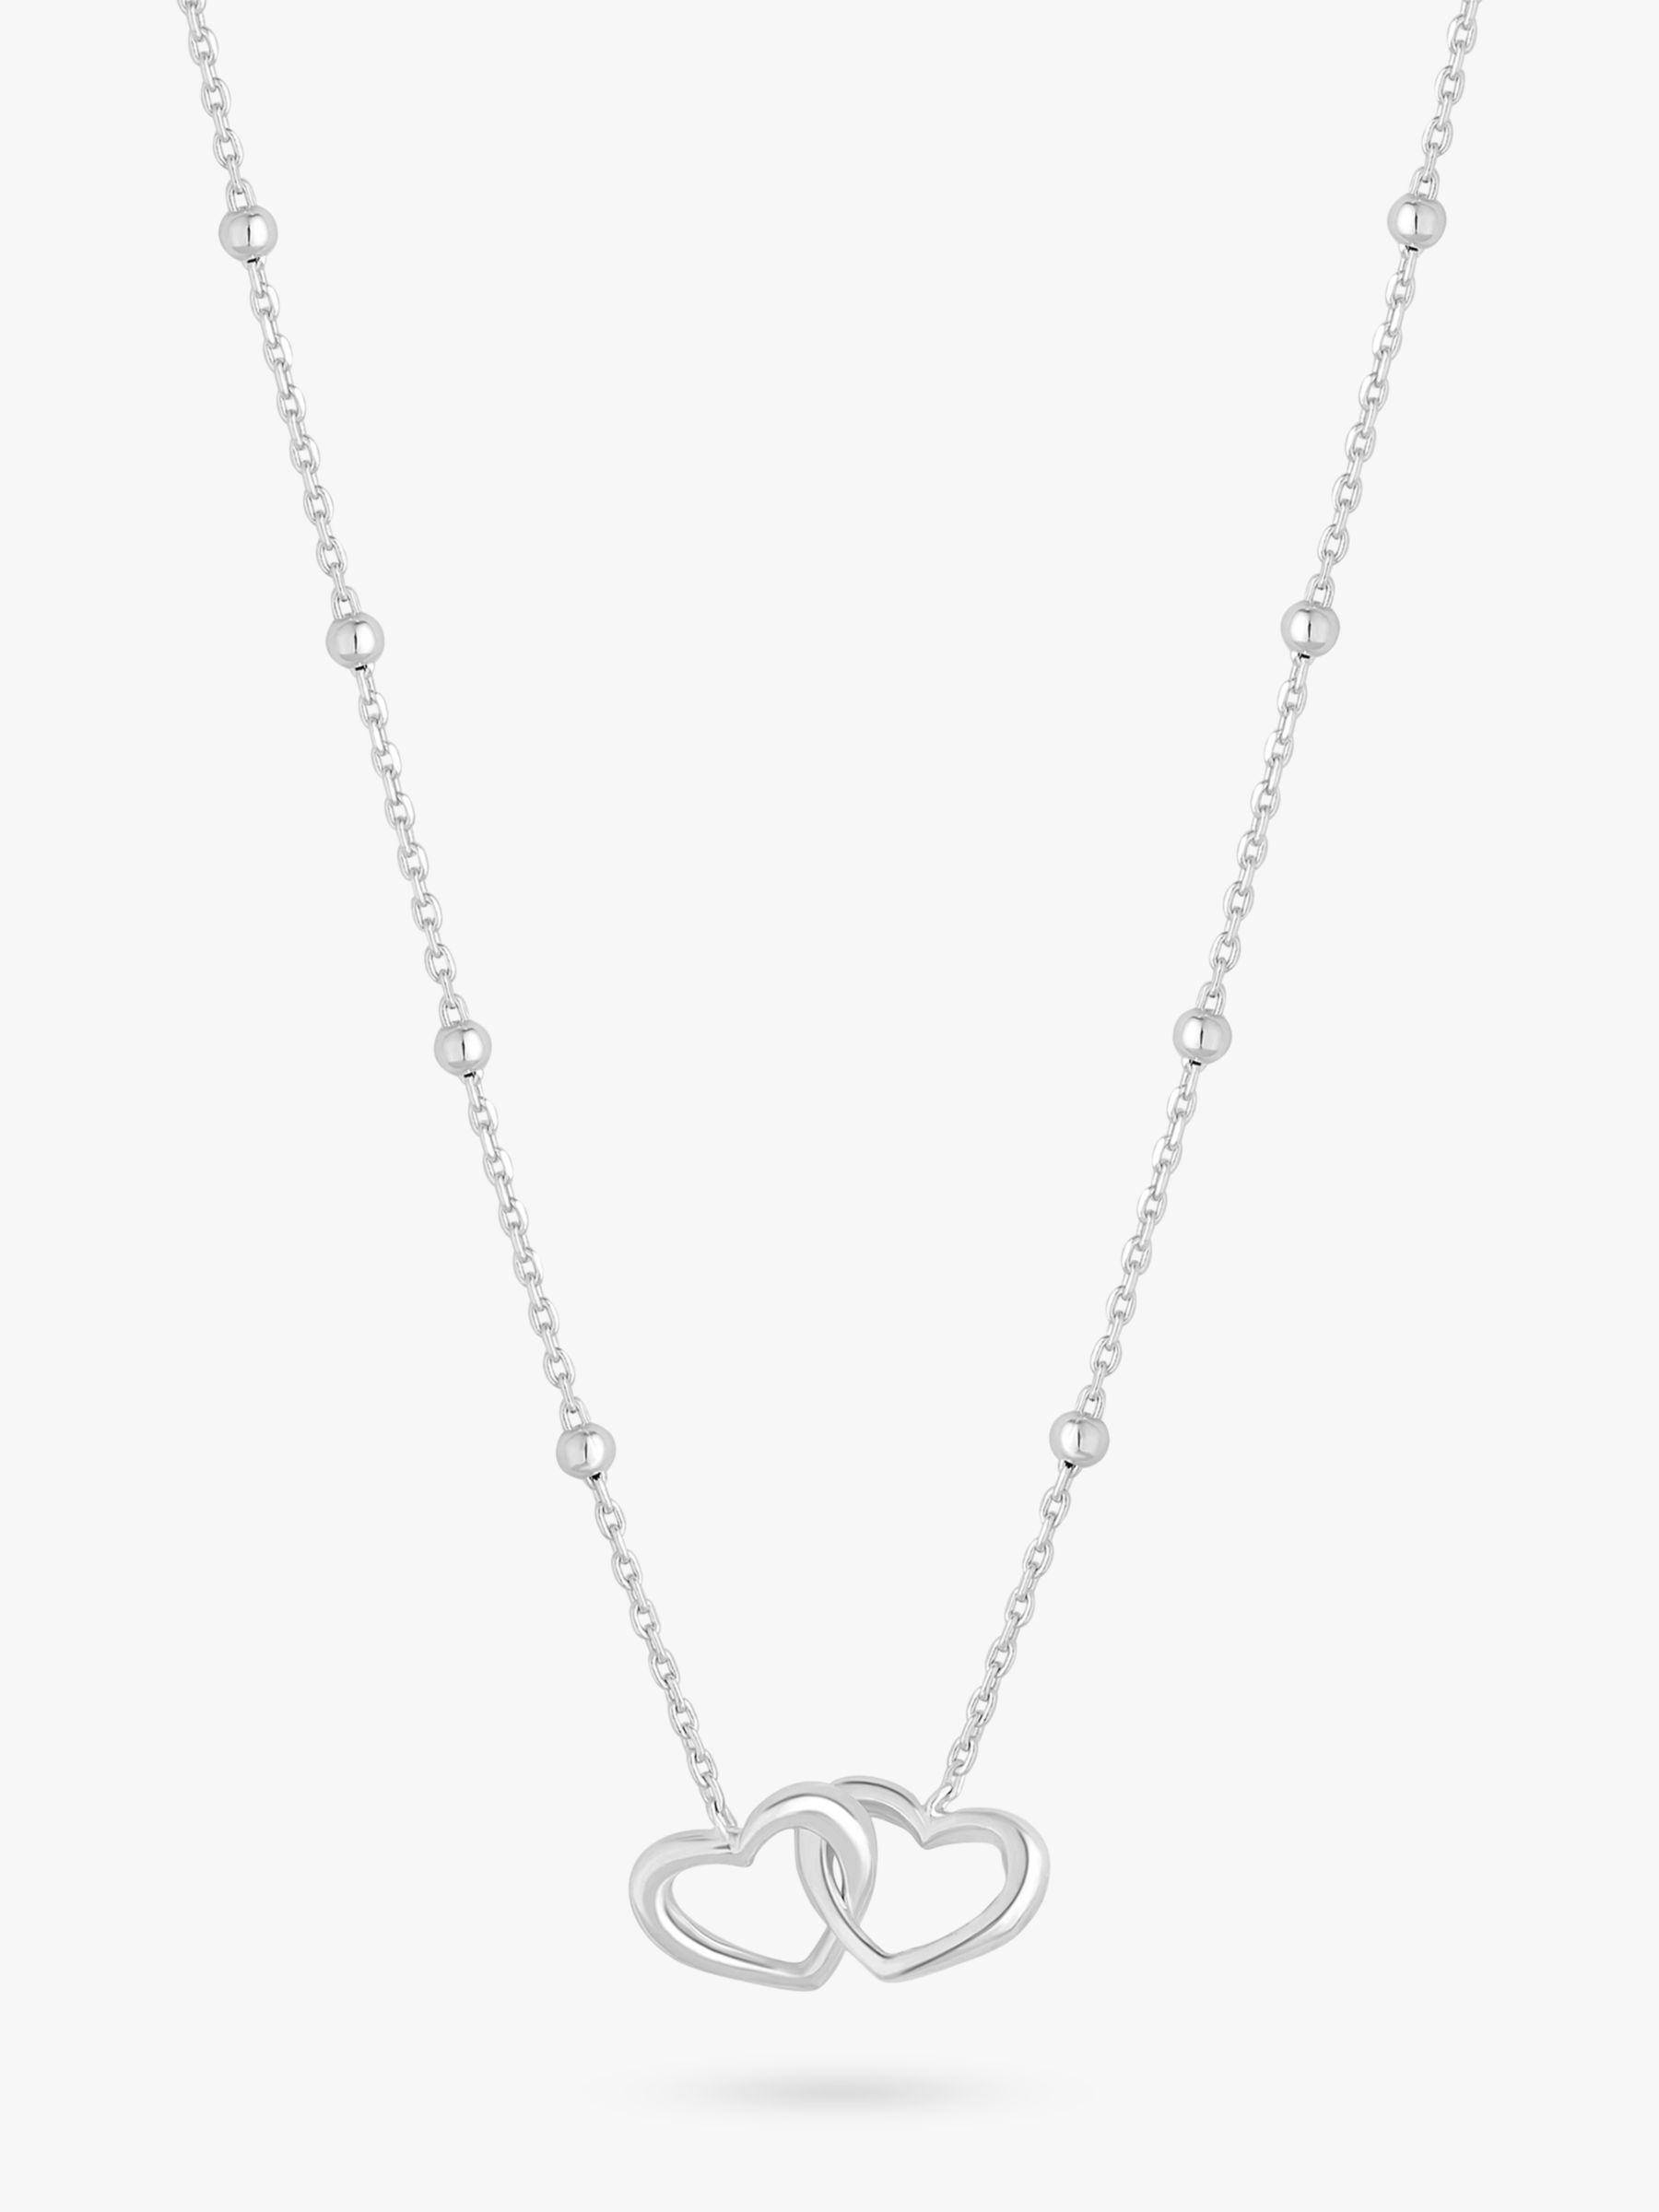 Buy Simply Silver Interlink Heart Necklace, Silver Online at johnlewis.com